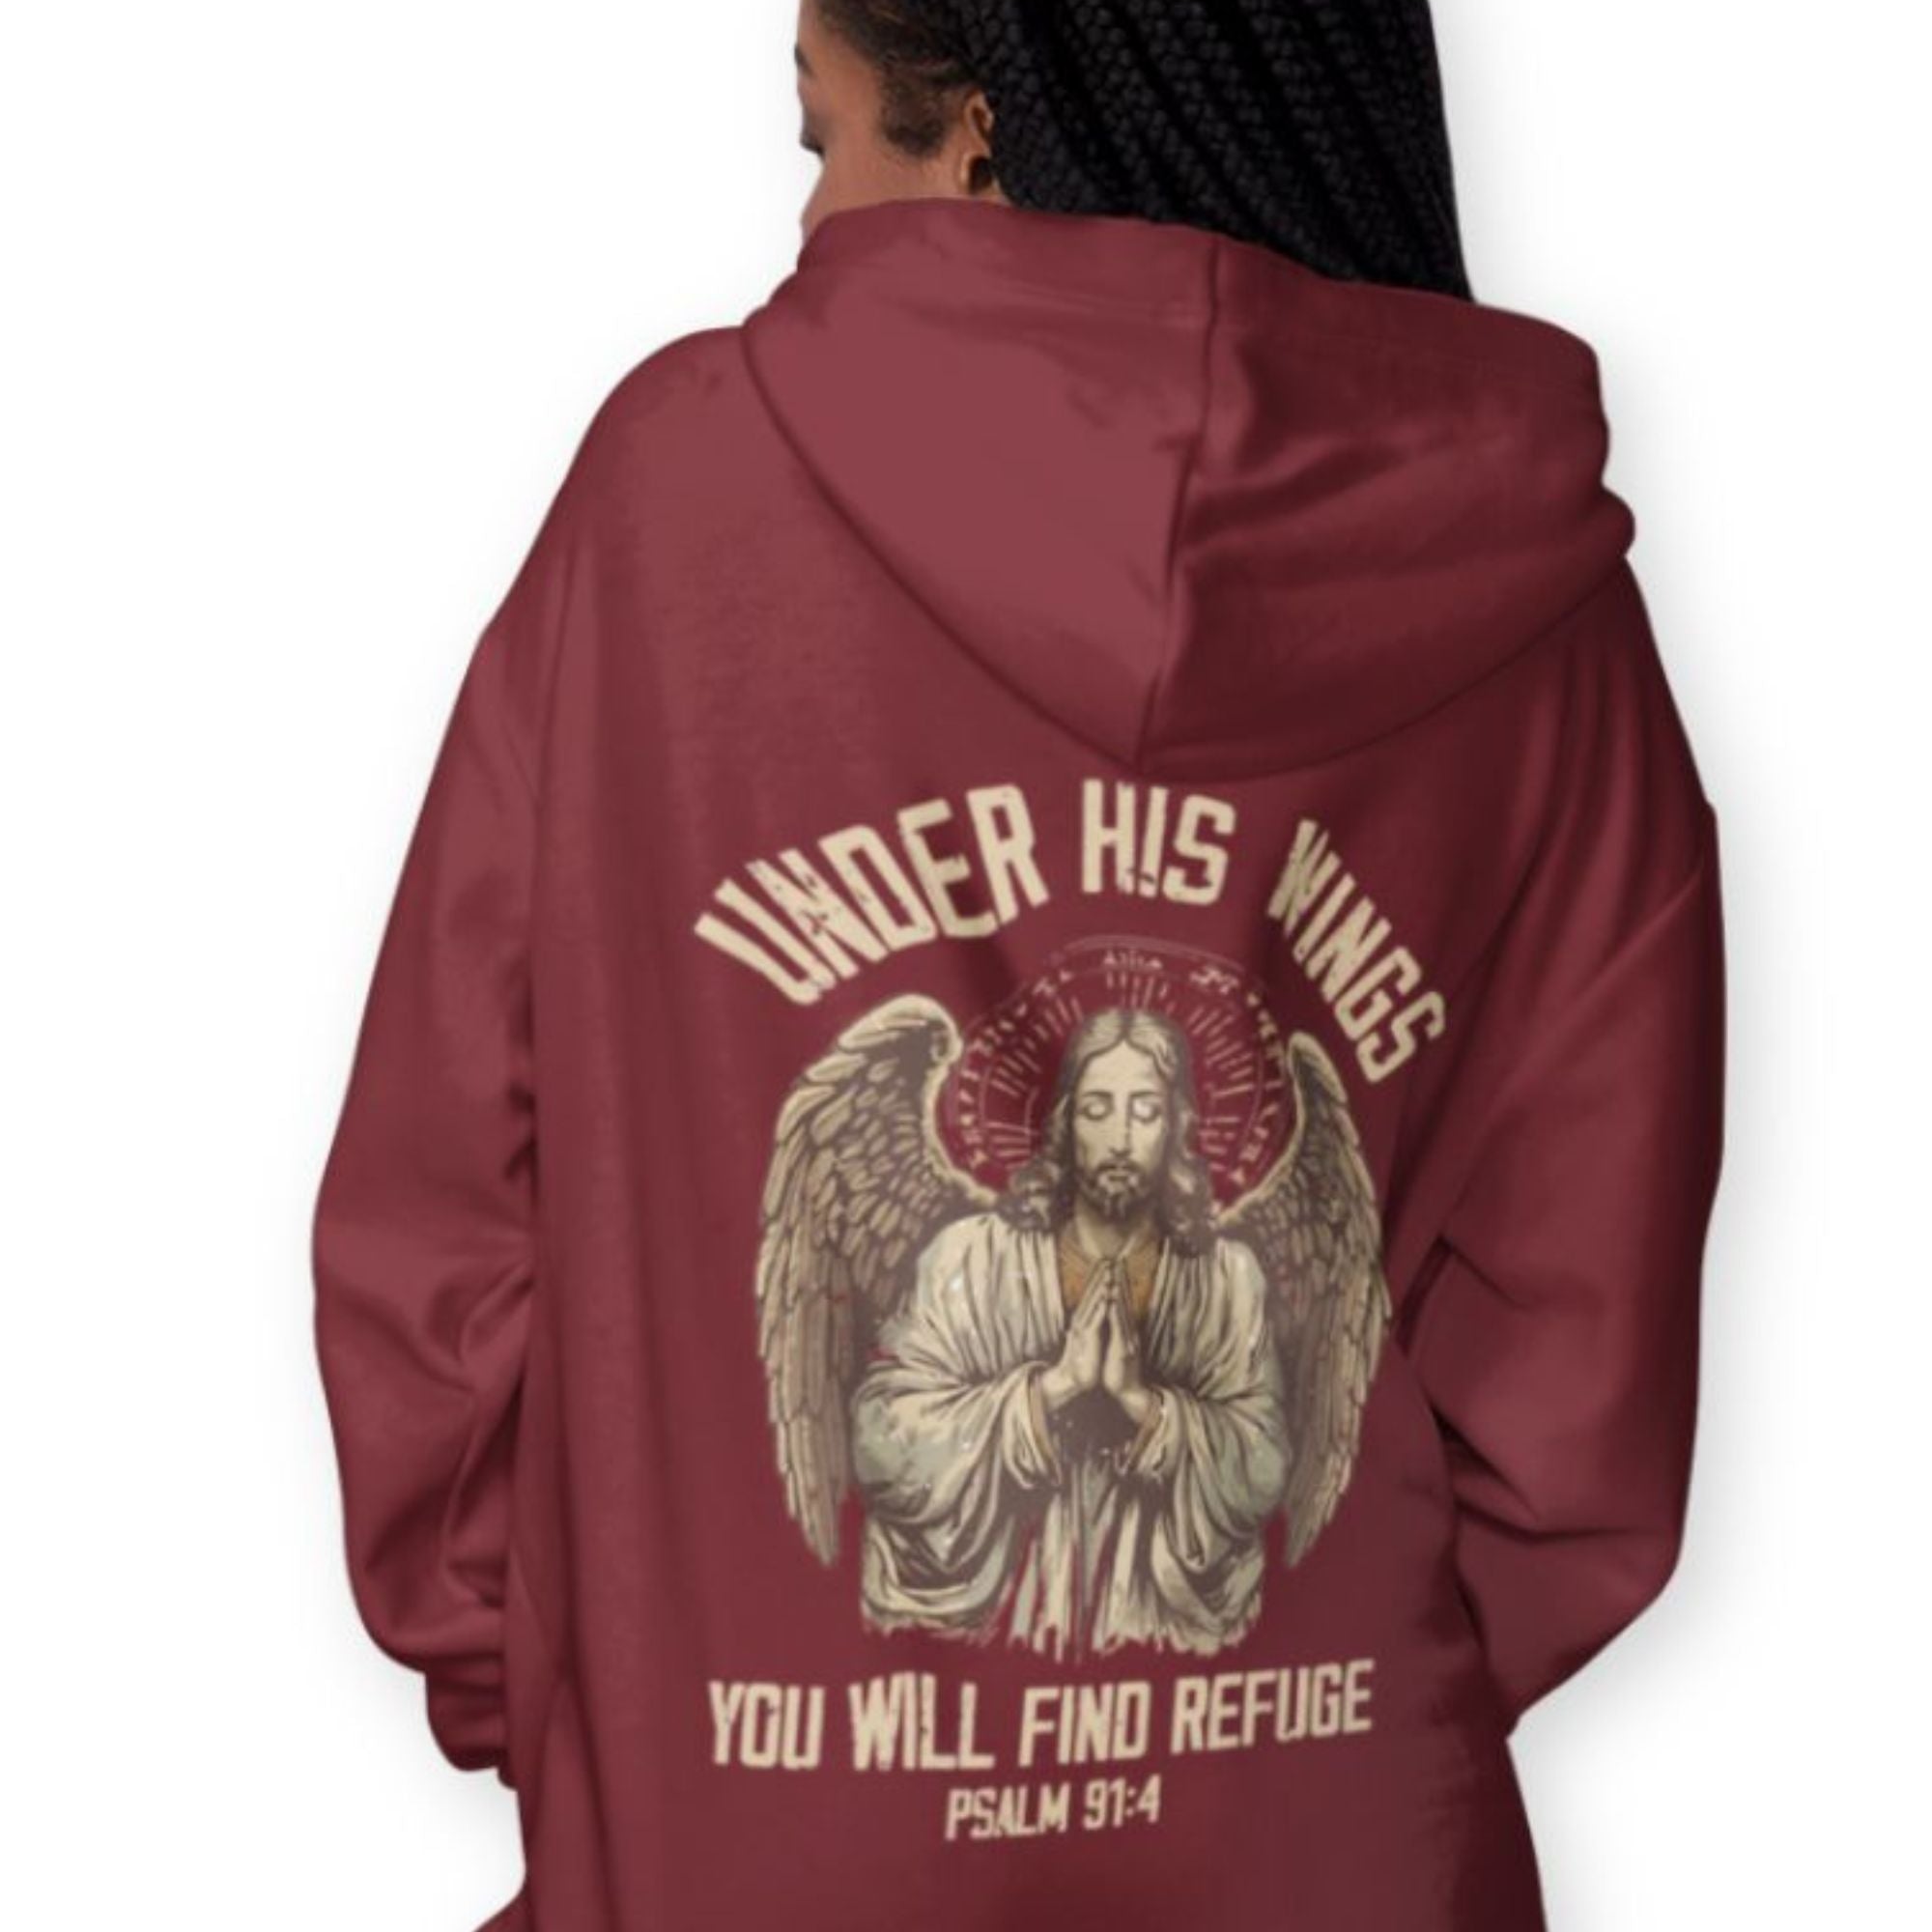 Under His Wings Retro-Inspired Premium Women's Hooded Jacket Heavy Blend™ Color: Burgundy Size: S Jesus Passion Apparel